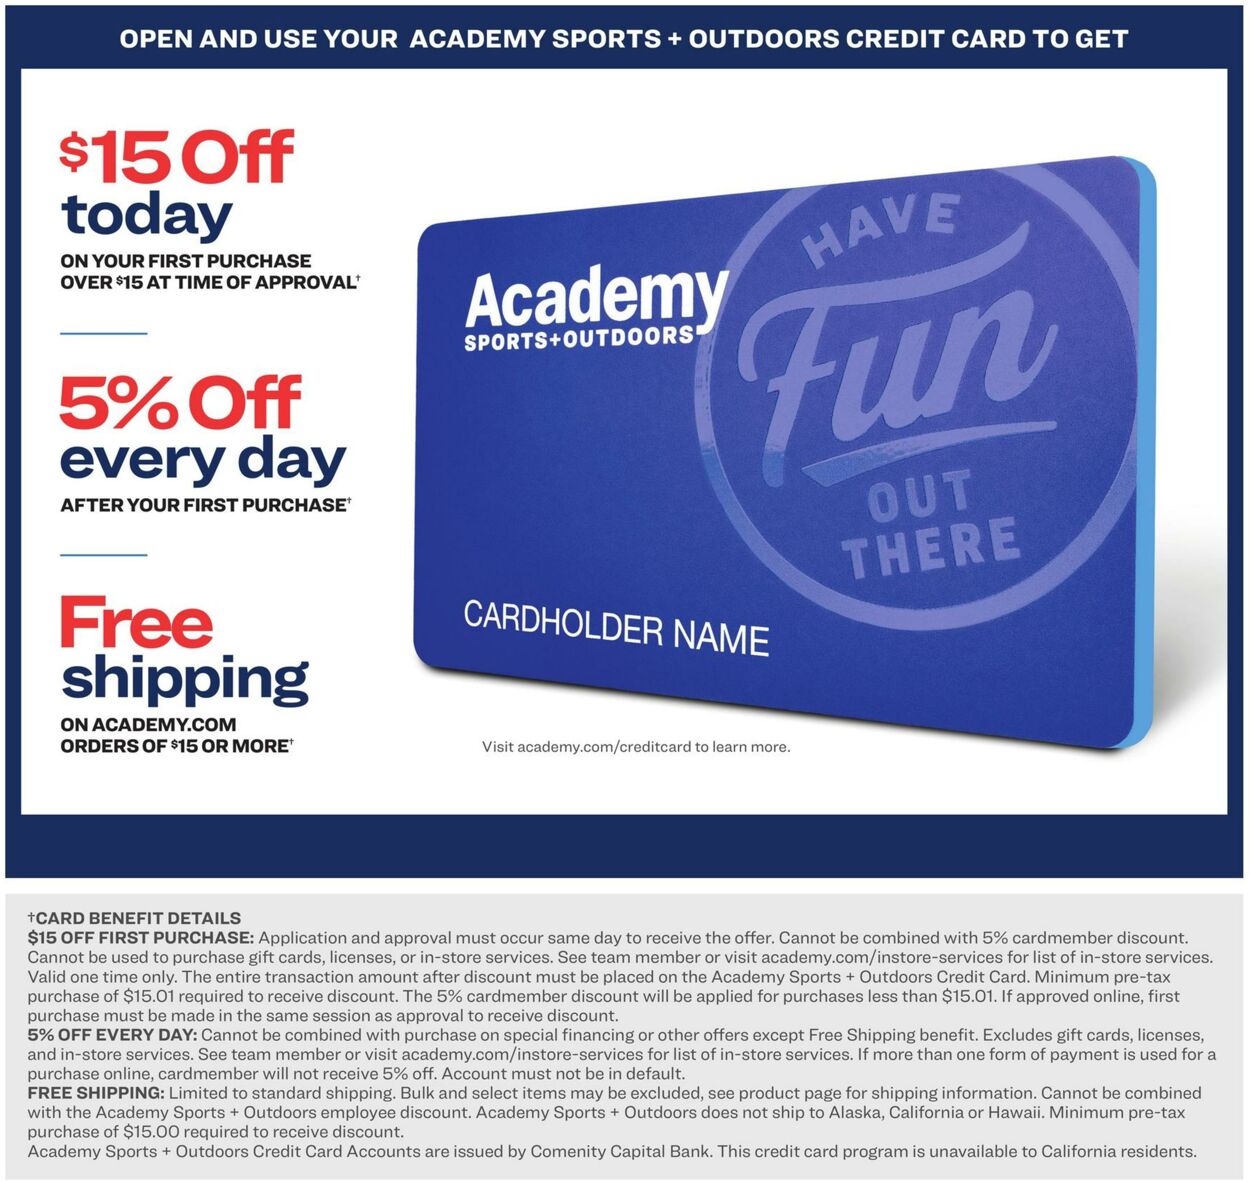 Weekly ad Academy Sports 08/29/2022 - 09/11/2022